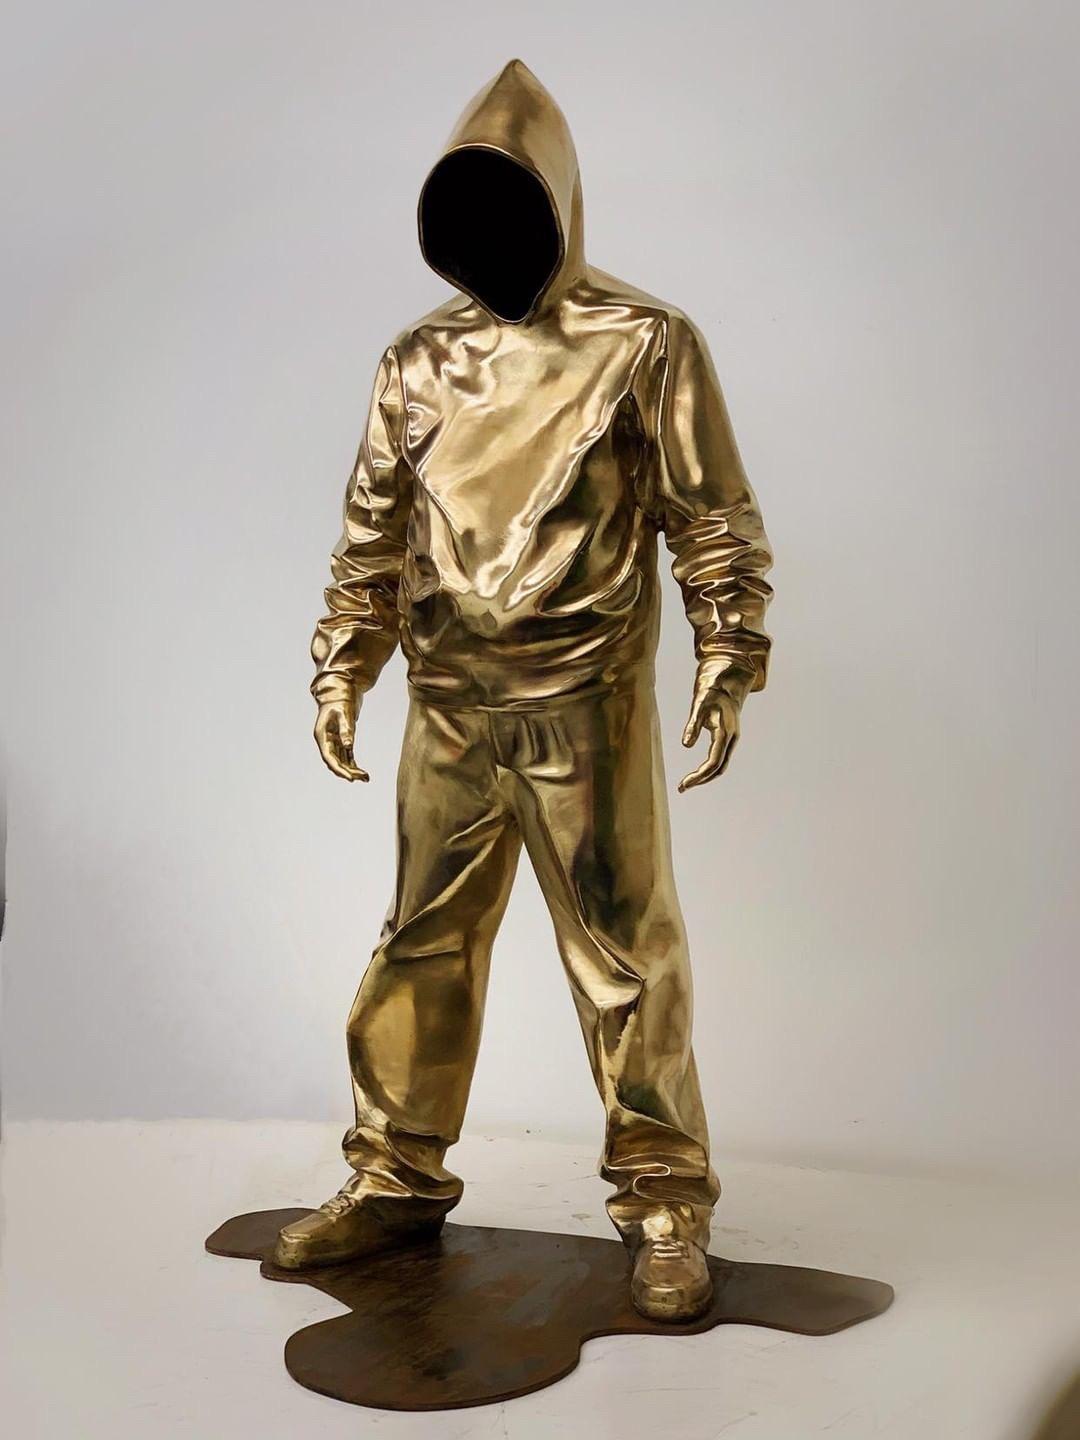 "Existence"  Bronze sculpture Edition 4/8 by Huang Yulong

35 2/5 × 21 7/10 × 15 in
90 × 55 × 38 cm

ATTENTION: MIGHT REQUIRE ADDITIONAL HANDLING TIME

ABOUT THE ARTIST
Huang Yulong was born in 1983 in Anhui Province, China. In 2007 he graduated